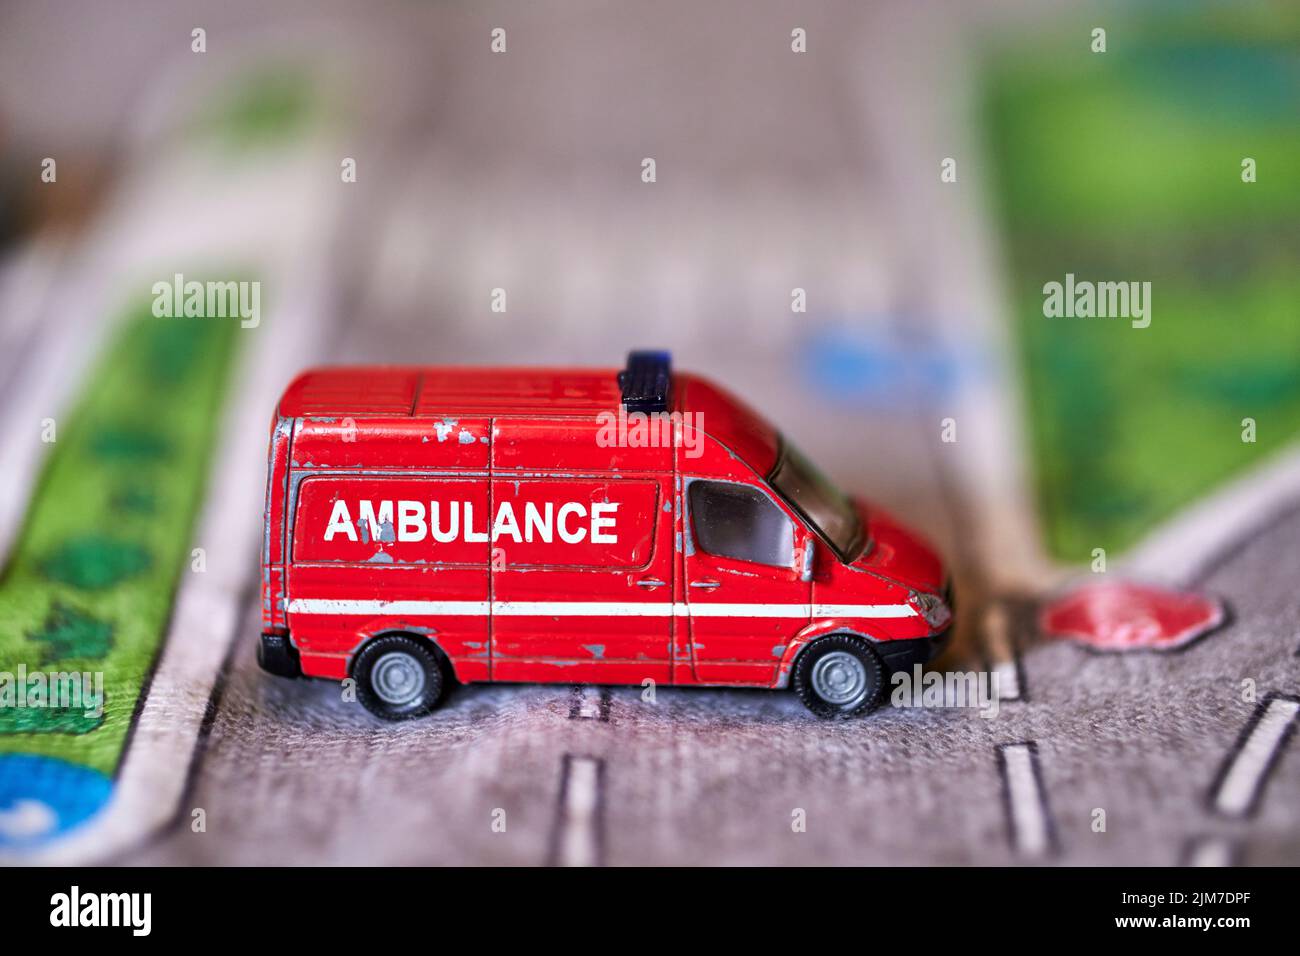 A closeup of a Siku brand red toy model ambulance van on the play road Stock Photo